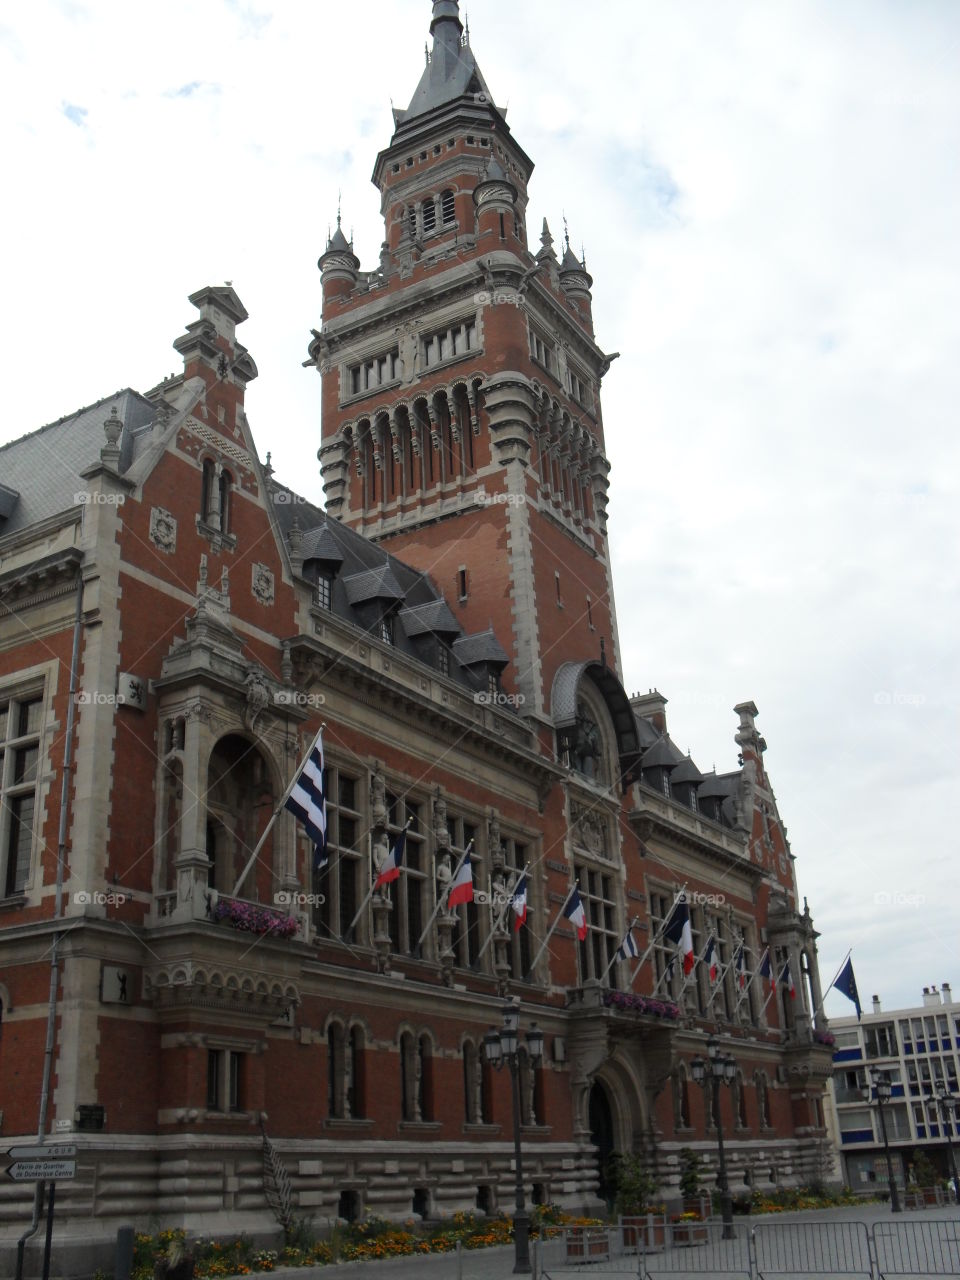 # Dunkirk# France# college# flags# city center#